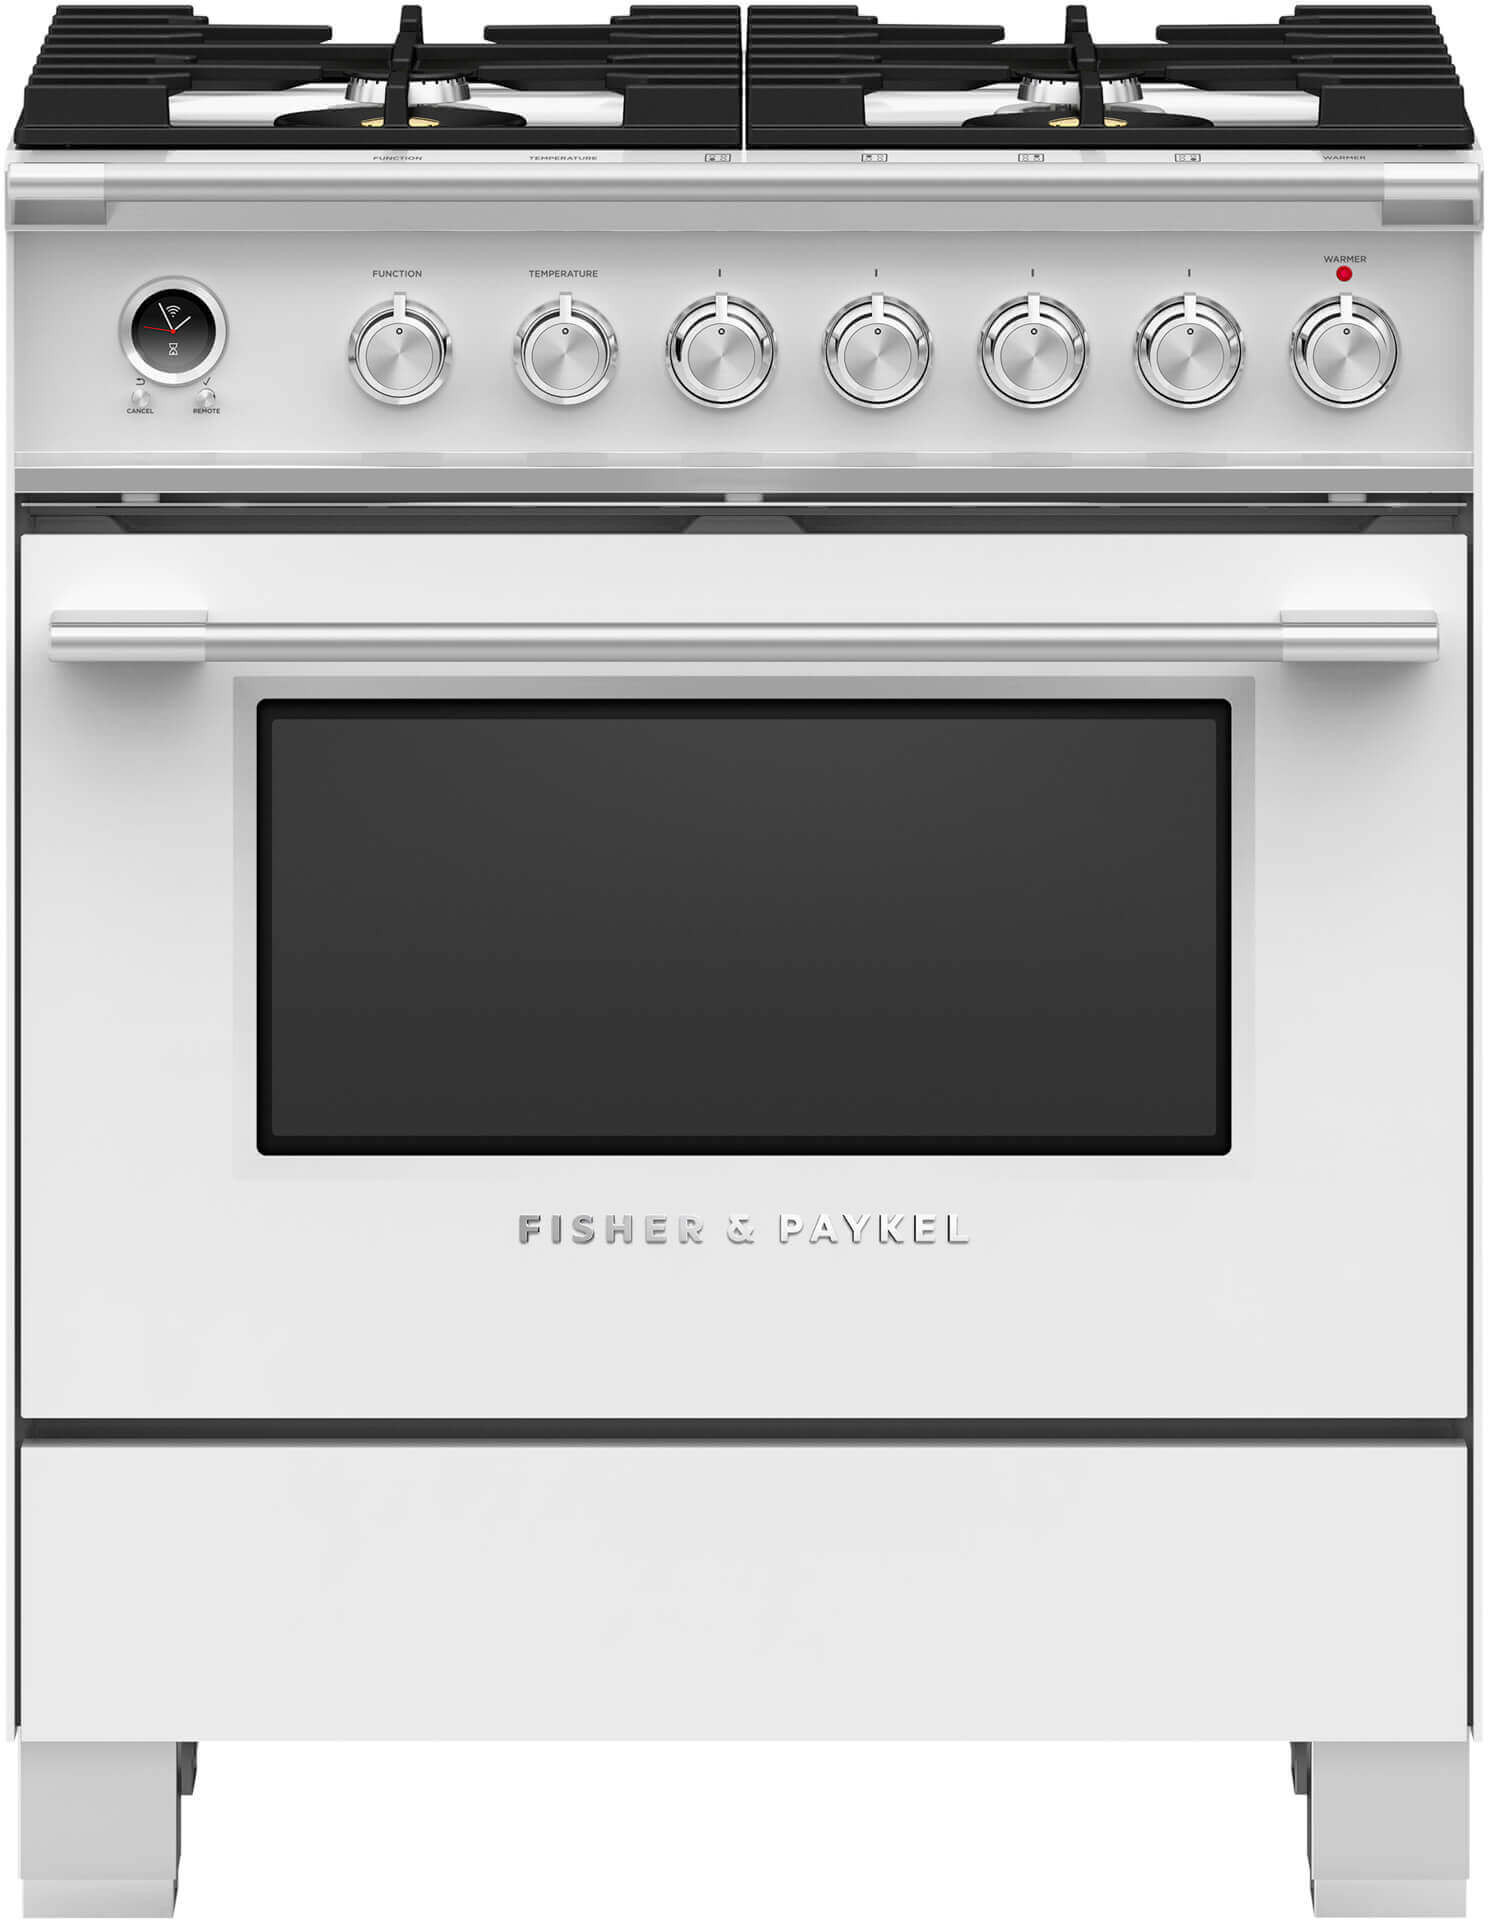 Fisher & Paykel Series 9 classic 30 Freestanding Dual Fuel Natural Gas Range OR30SCG6W1